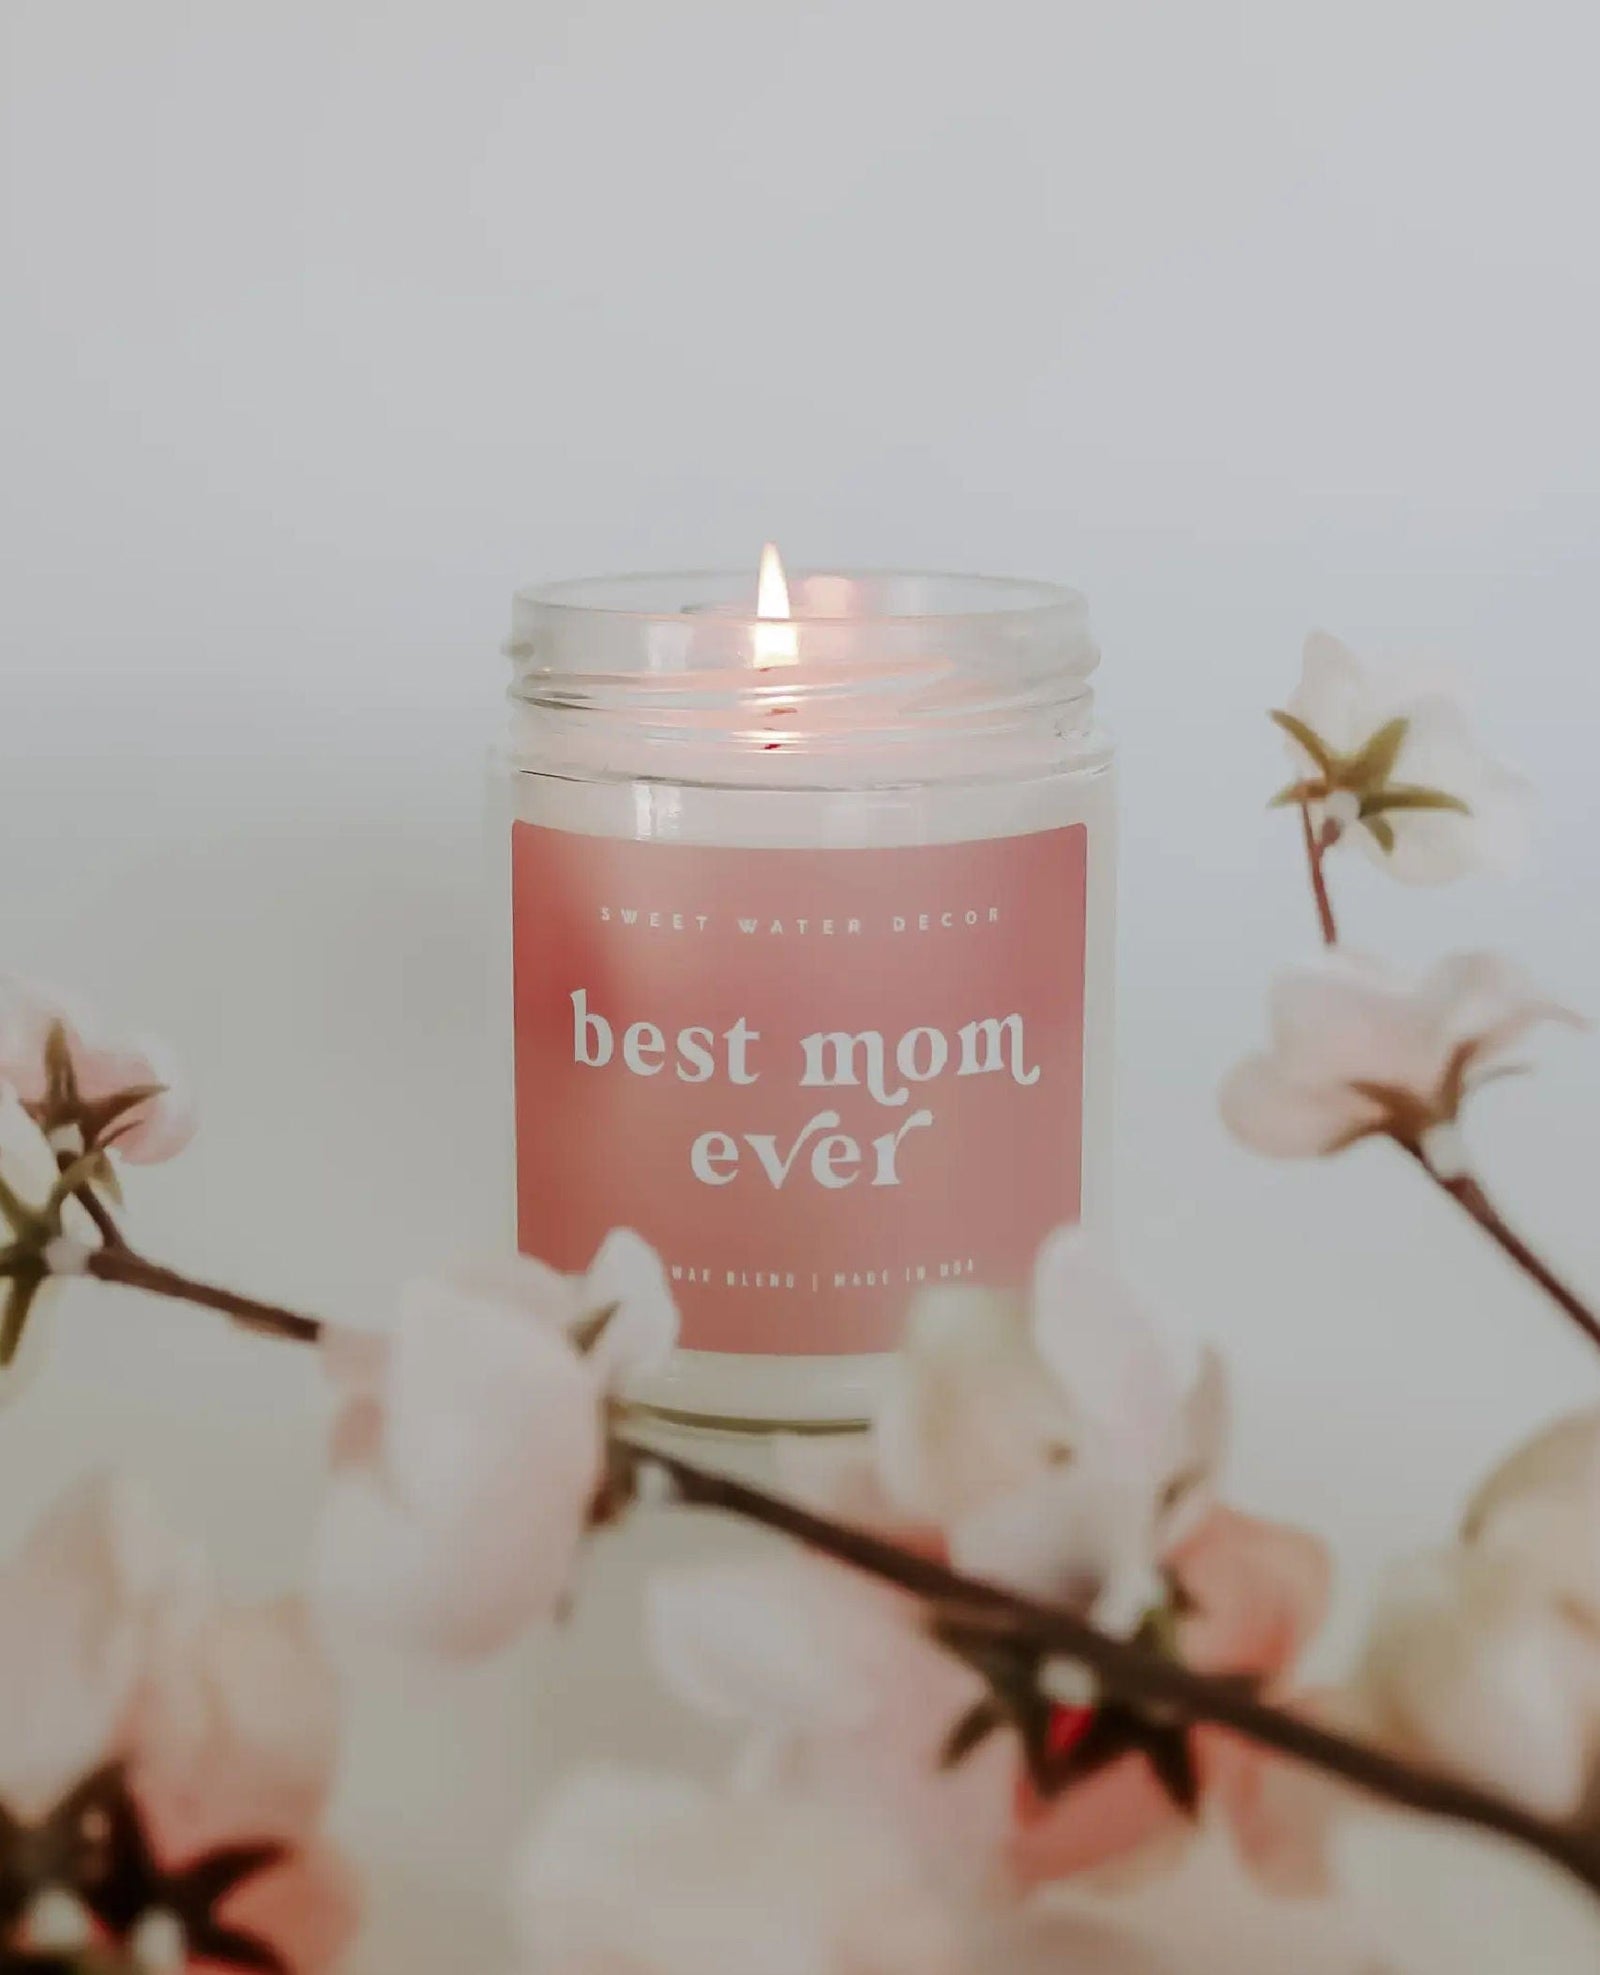 Best Mom Ever Soy Candle